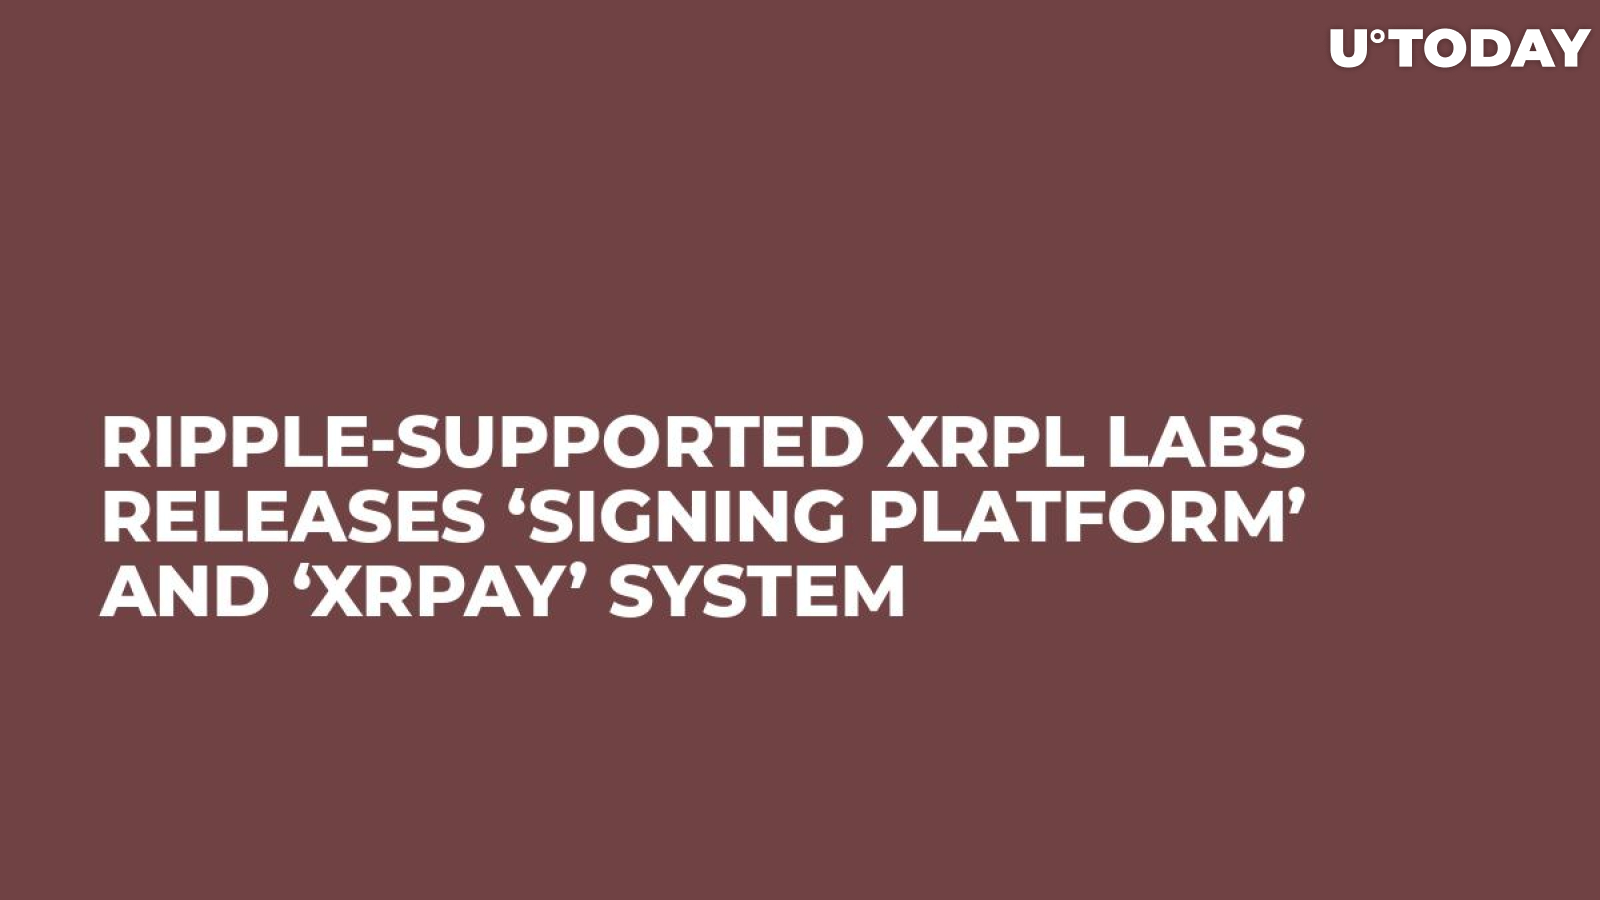 Ripple-Supported XRPL Labs Releases ‘Signing Platform’ and ‘XRPAY’ System